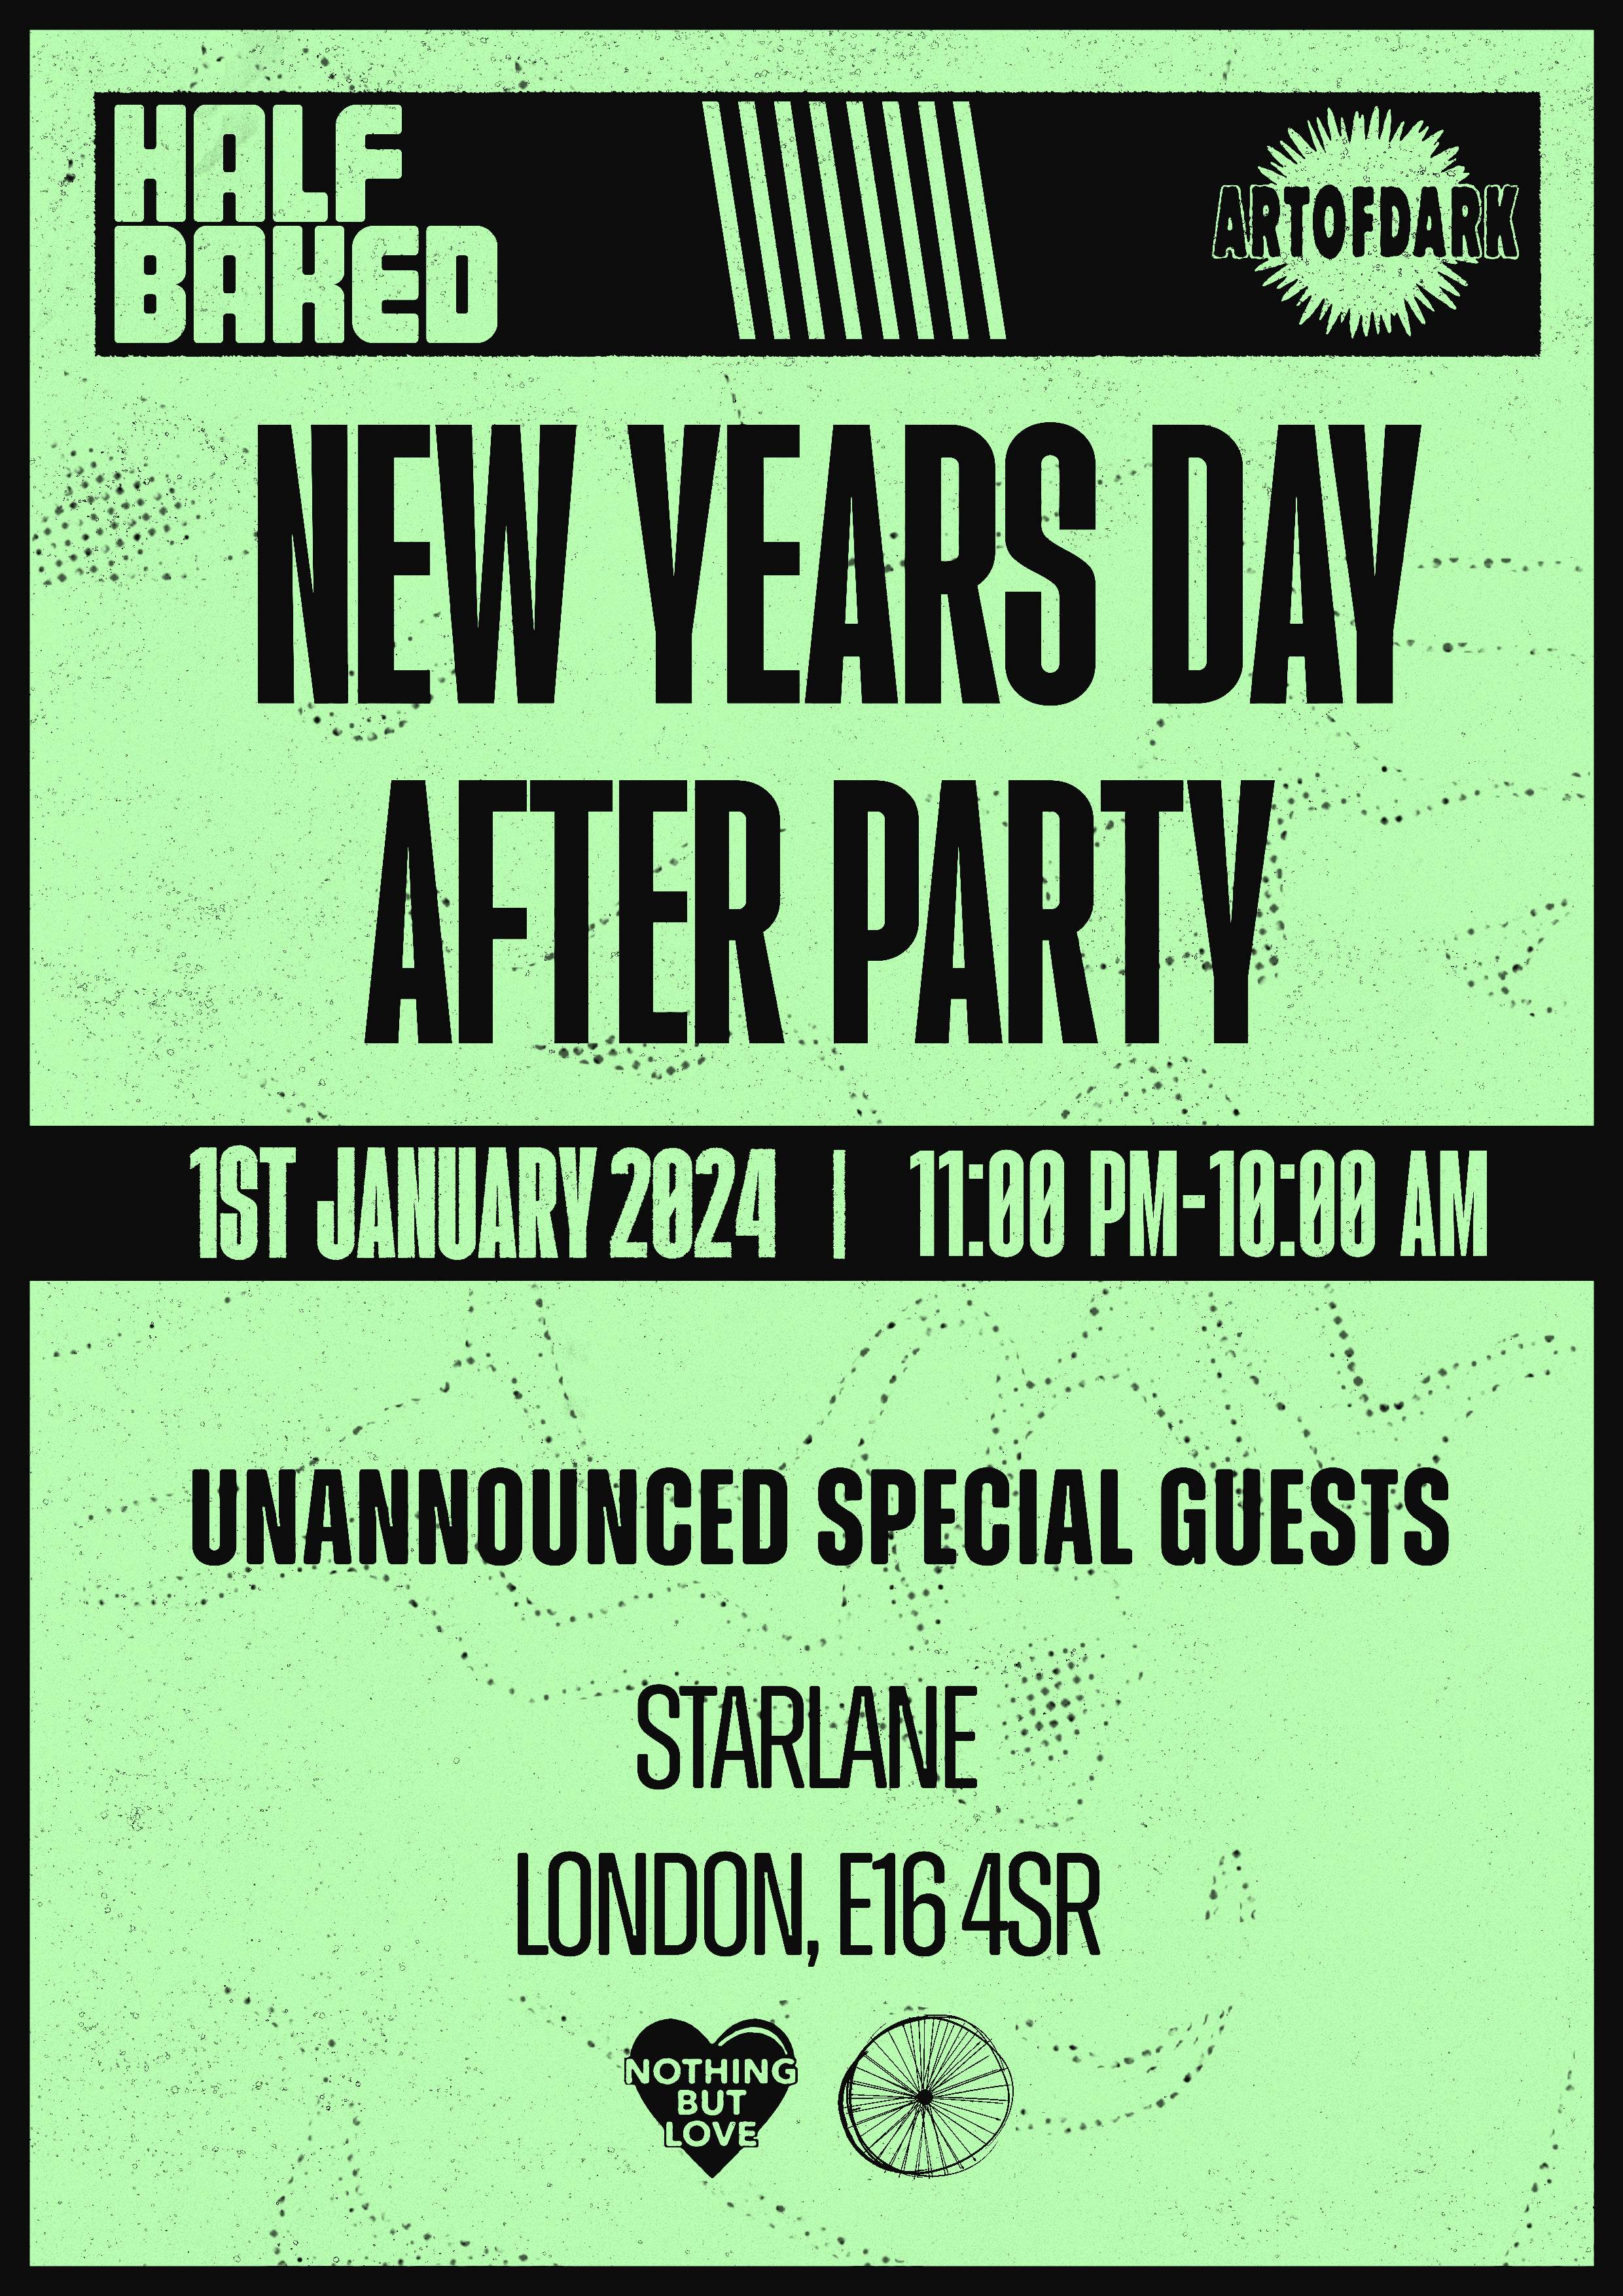 Half Baked X Art of Dark - New Years Day After Party - Página frontal